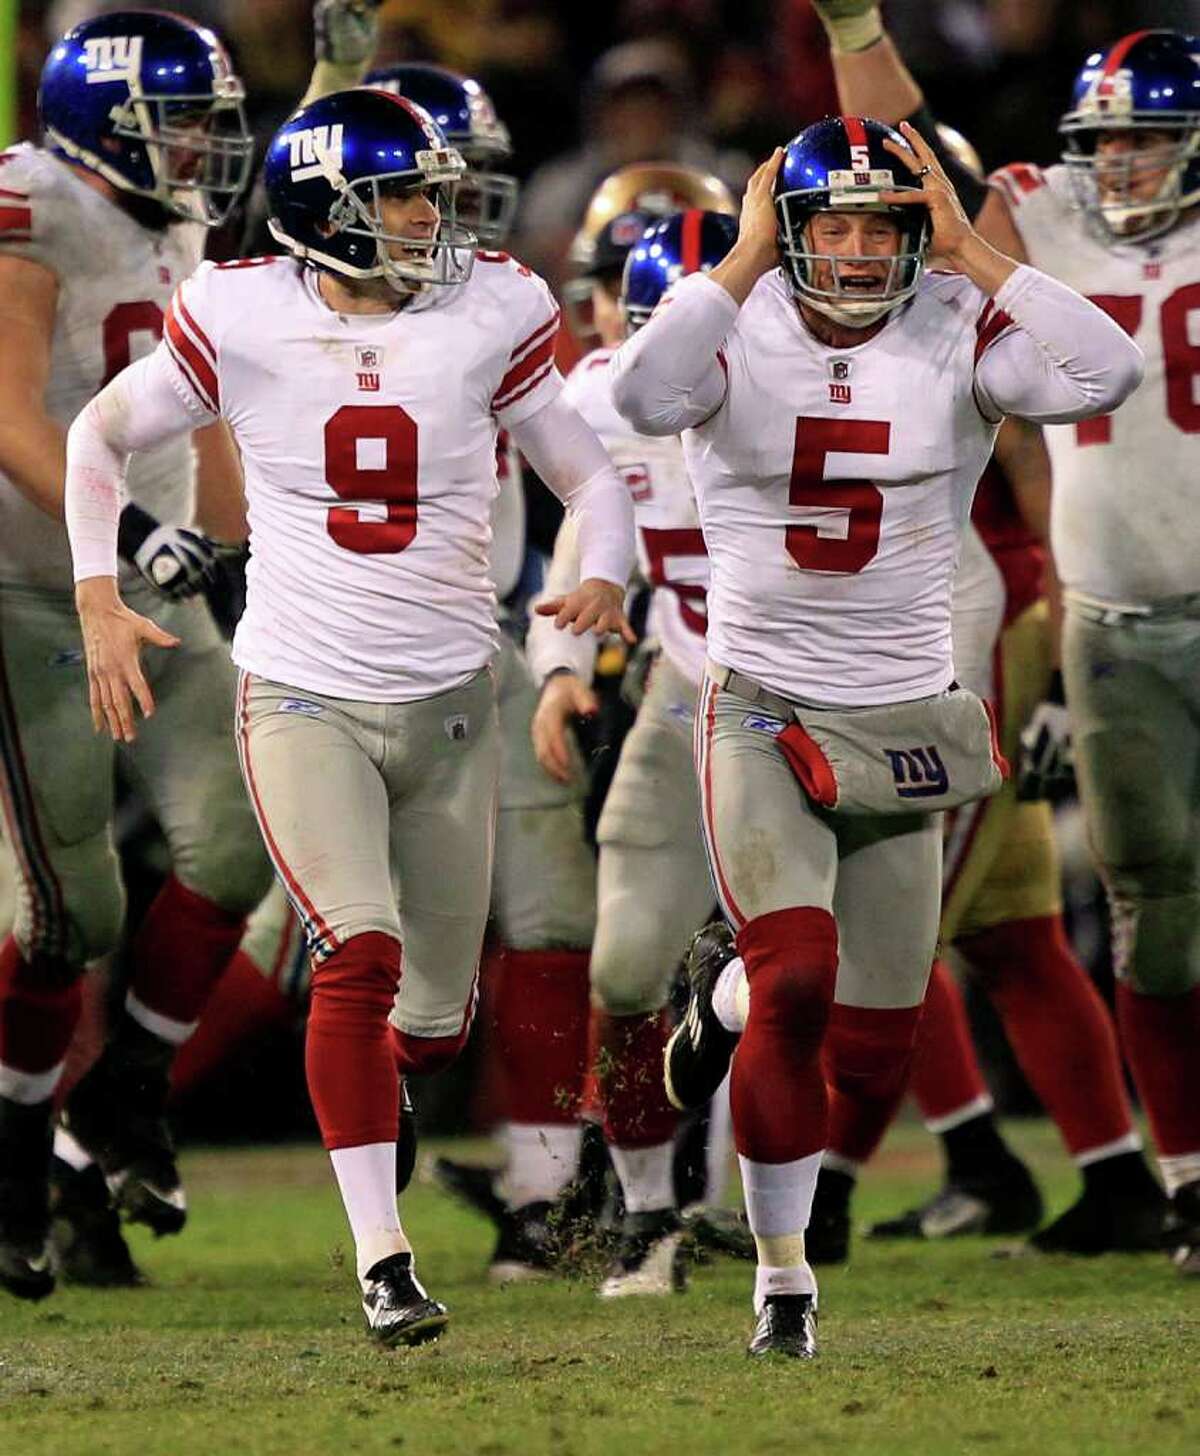 Giants kicker Lawrence Tynes (9) and holder Steve Weatherford (5) celebrate after Tynes kicked the game winning field goal.